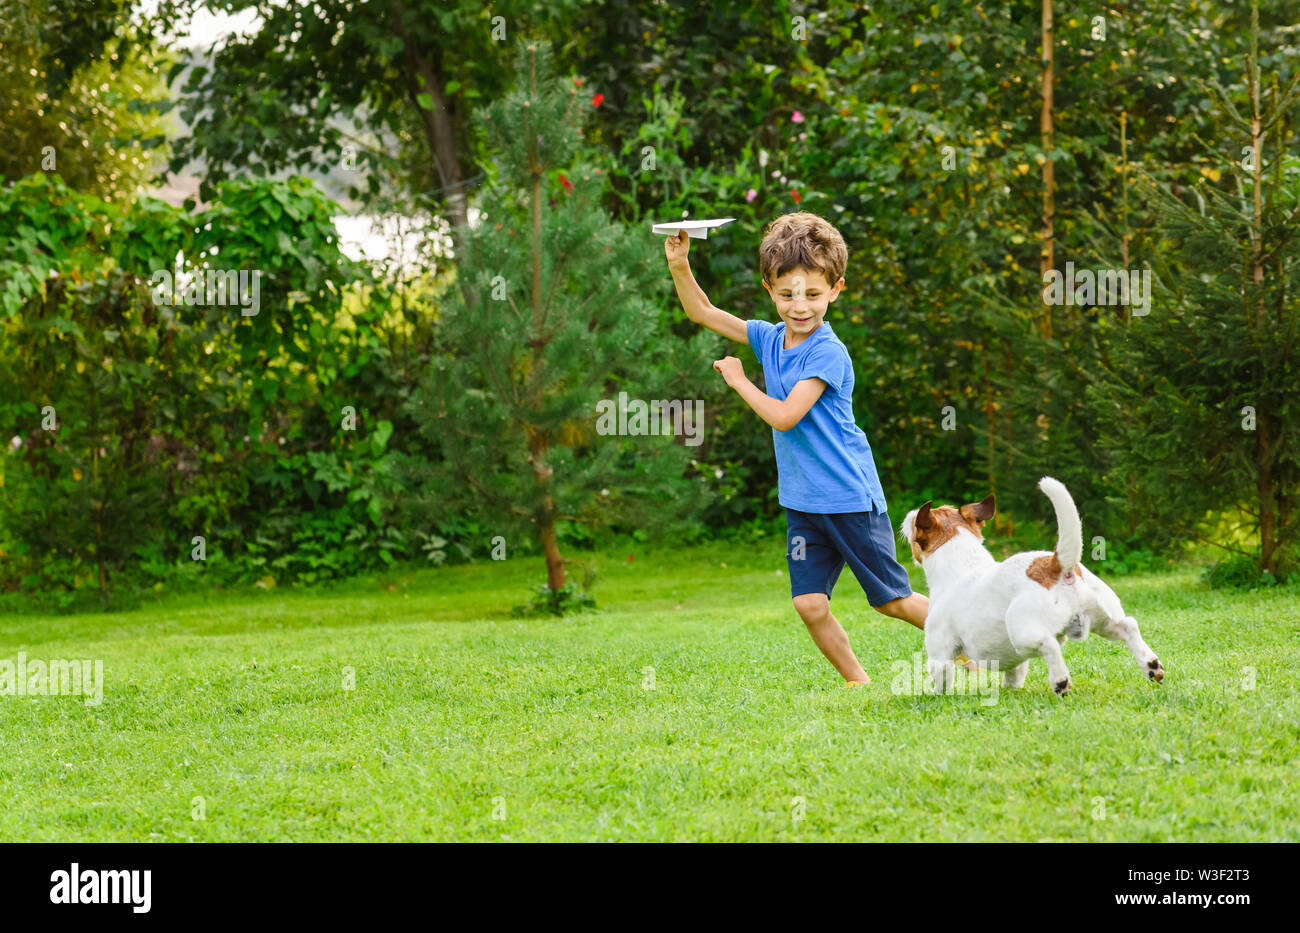 Kid playing with paper airplane and dog outdoors at backyard lawn Stock Photo